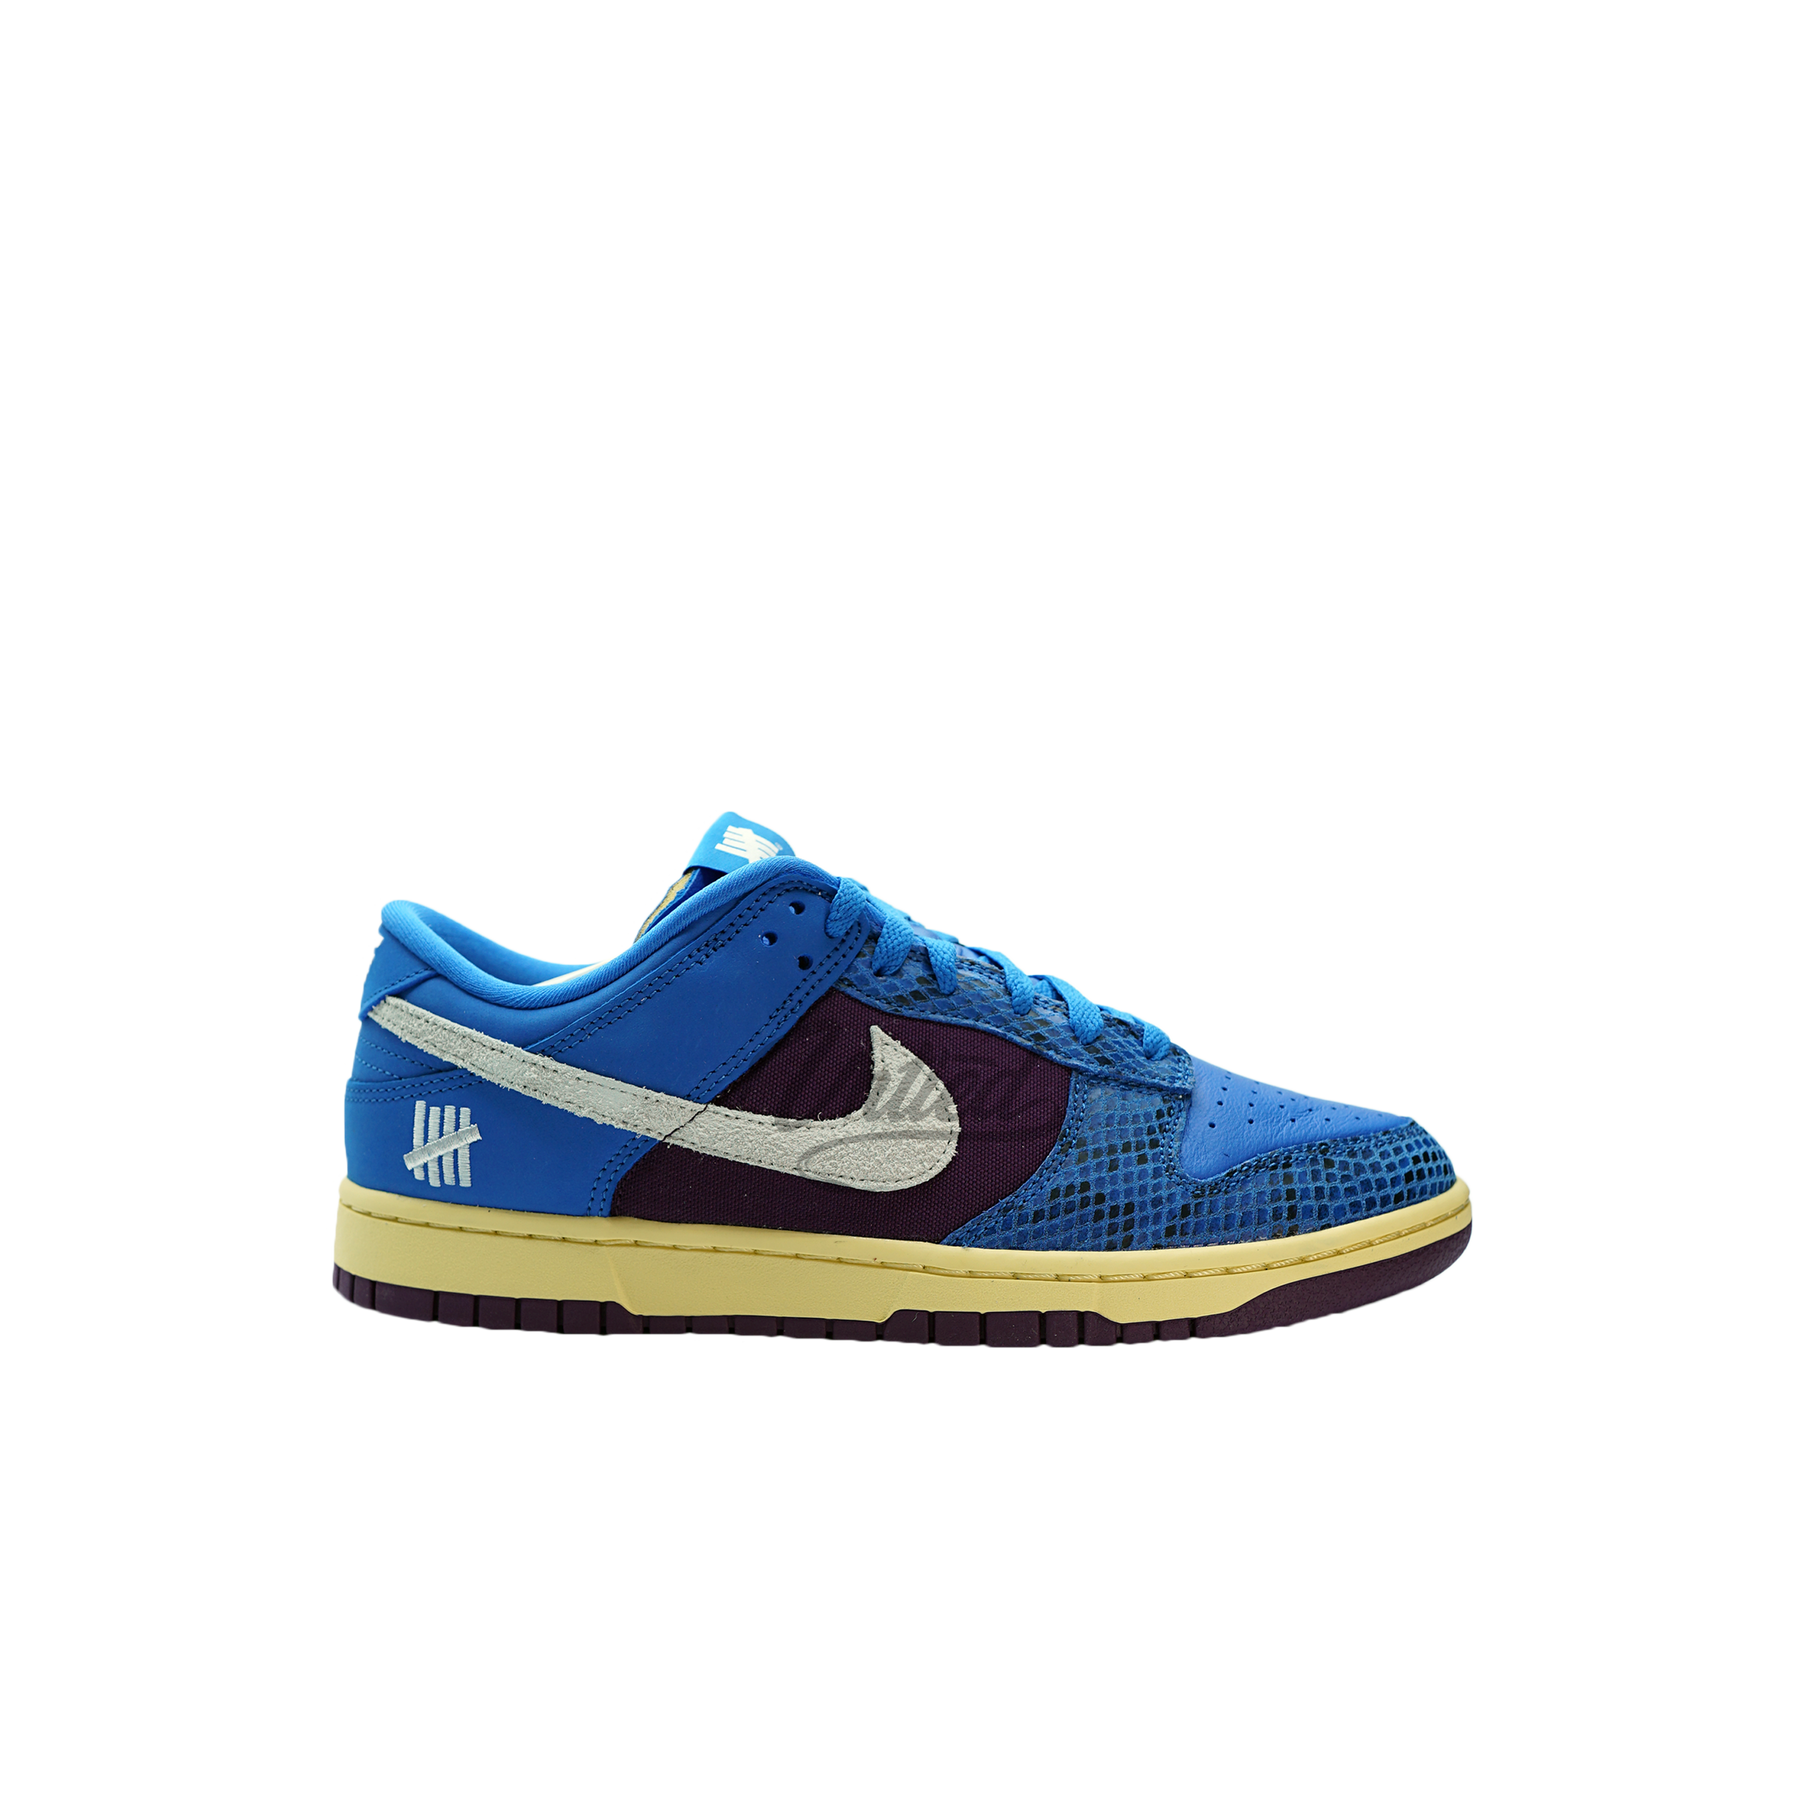 Nike SB Dunk Low x Undefeated "Blue Snake"